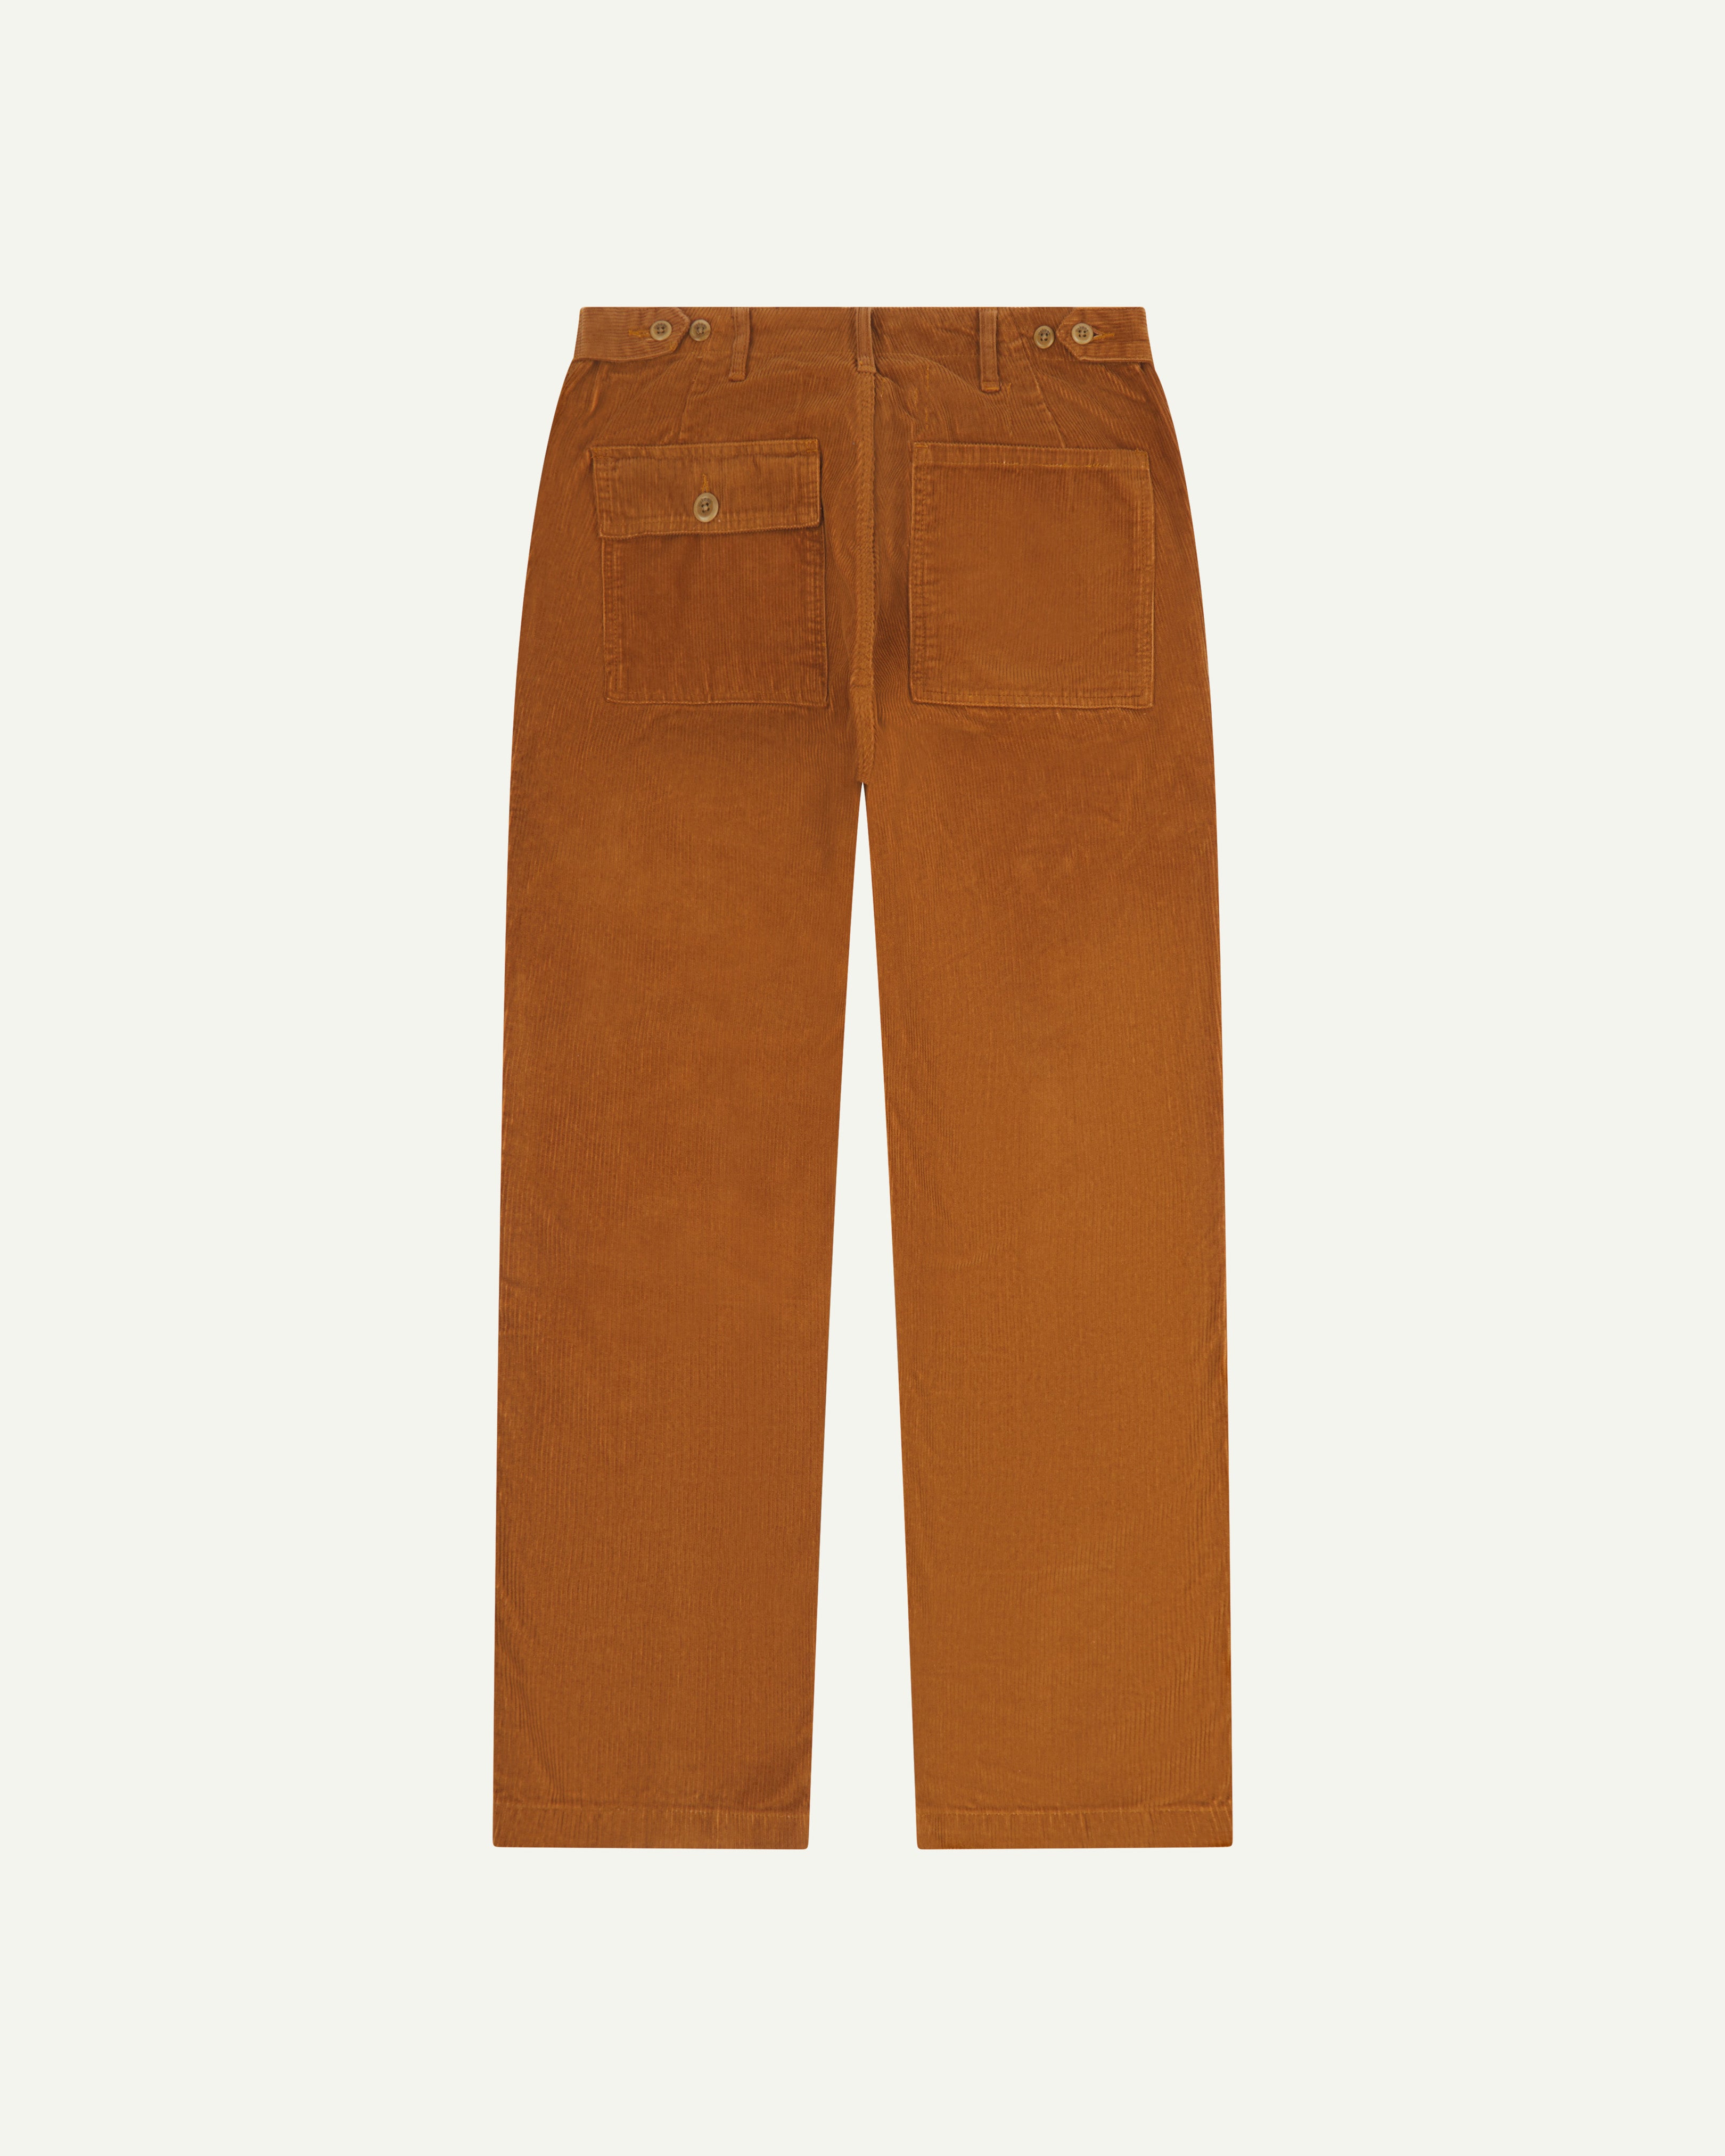 Back flat shot of #5005 Uskees men's organic cord 'tan' casual trousers.